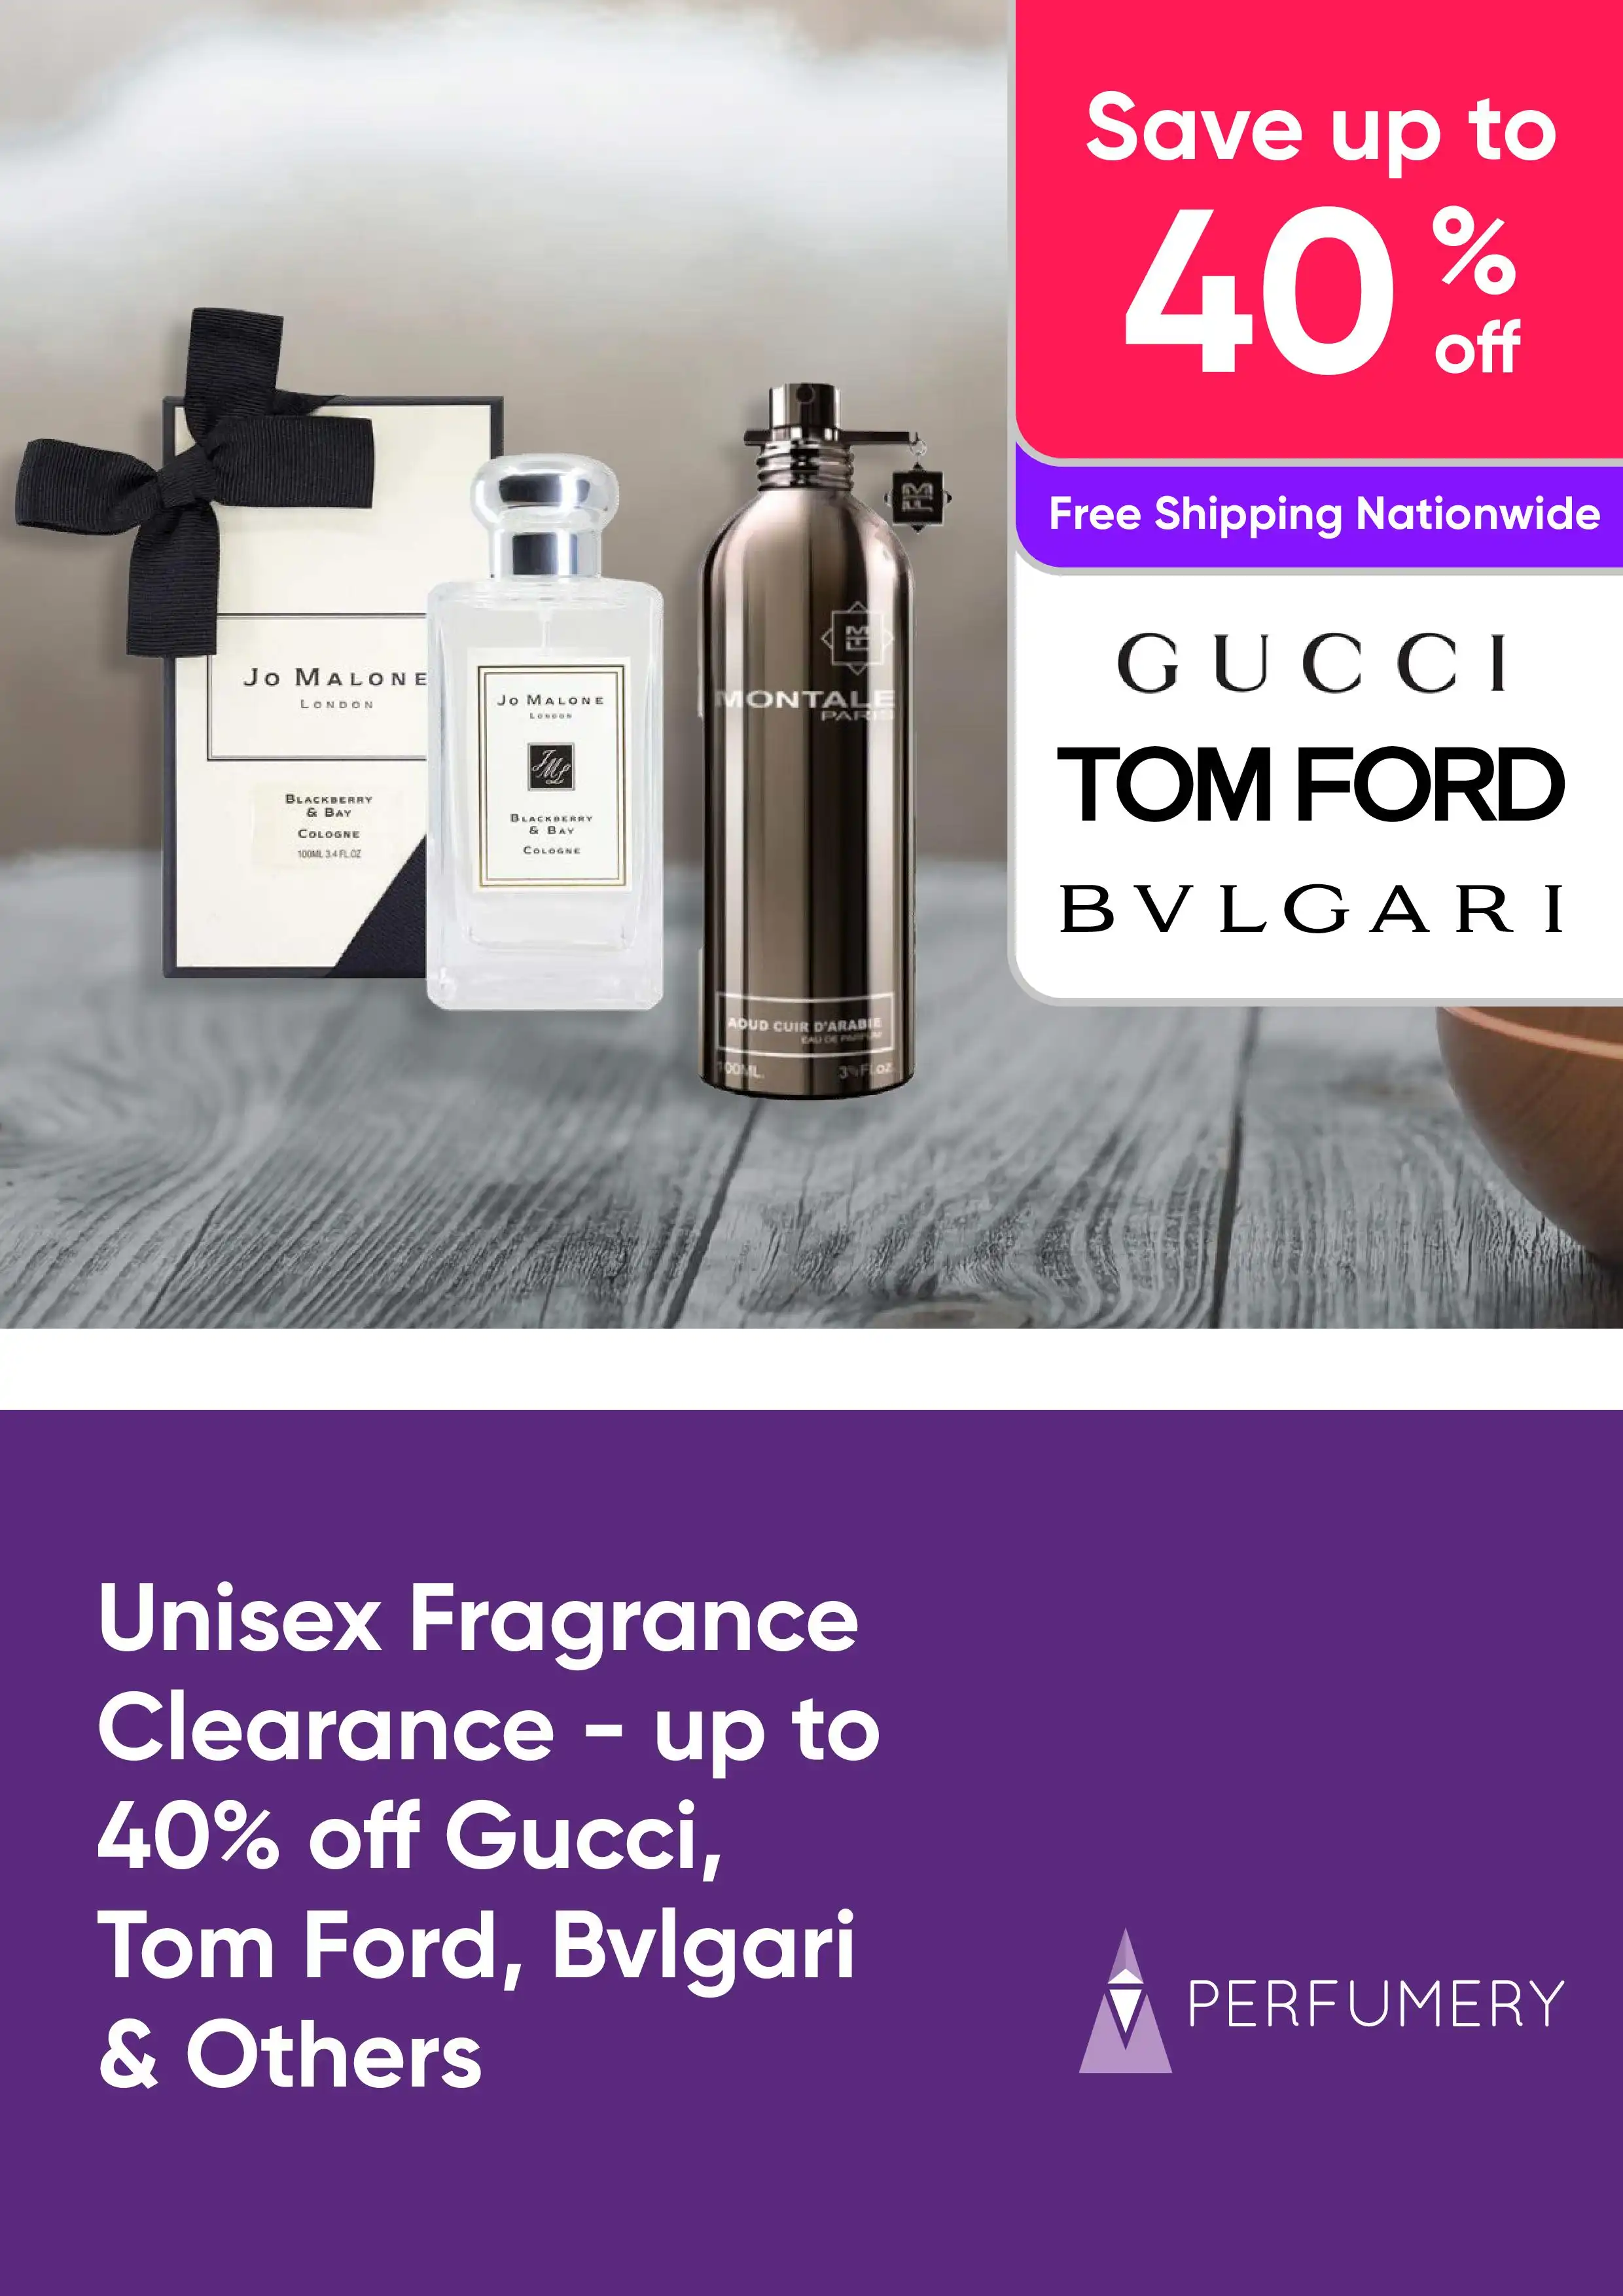 Unisex Fragrance Clearance - up to 40% off Gucci, Tom Ford, Bvlgari & others